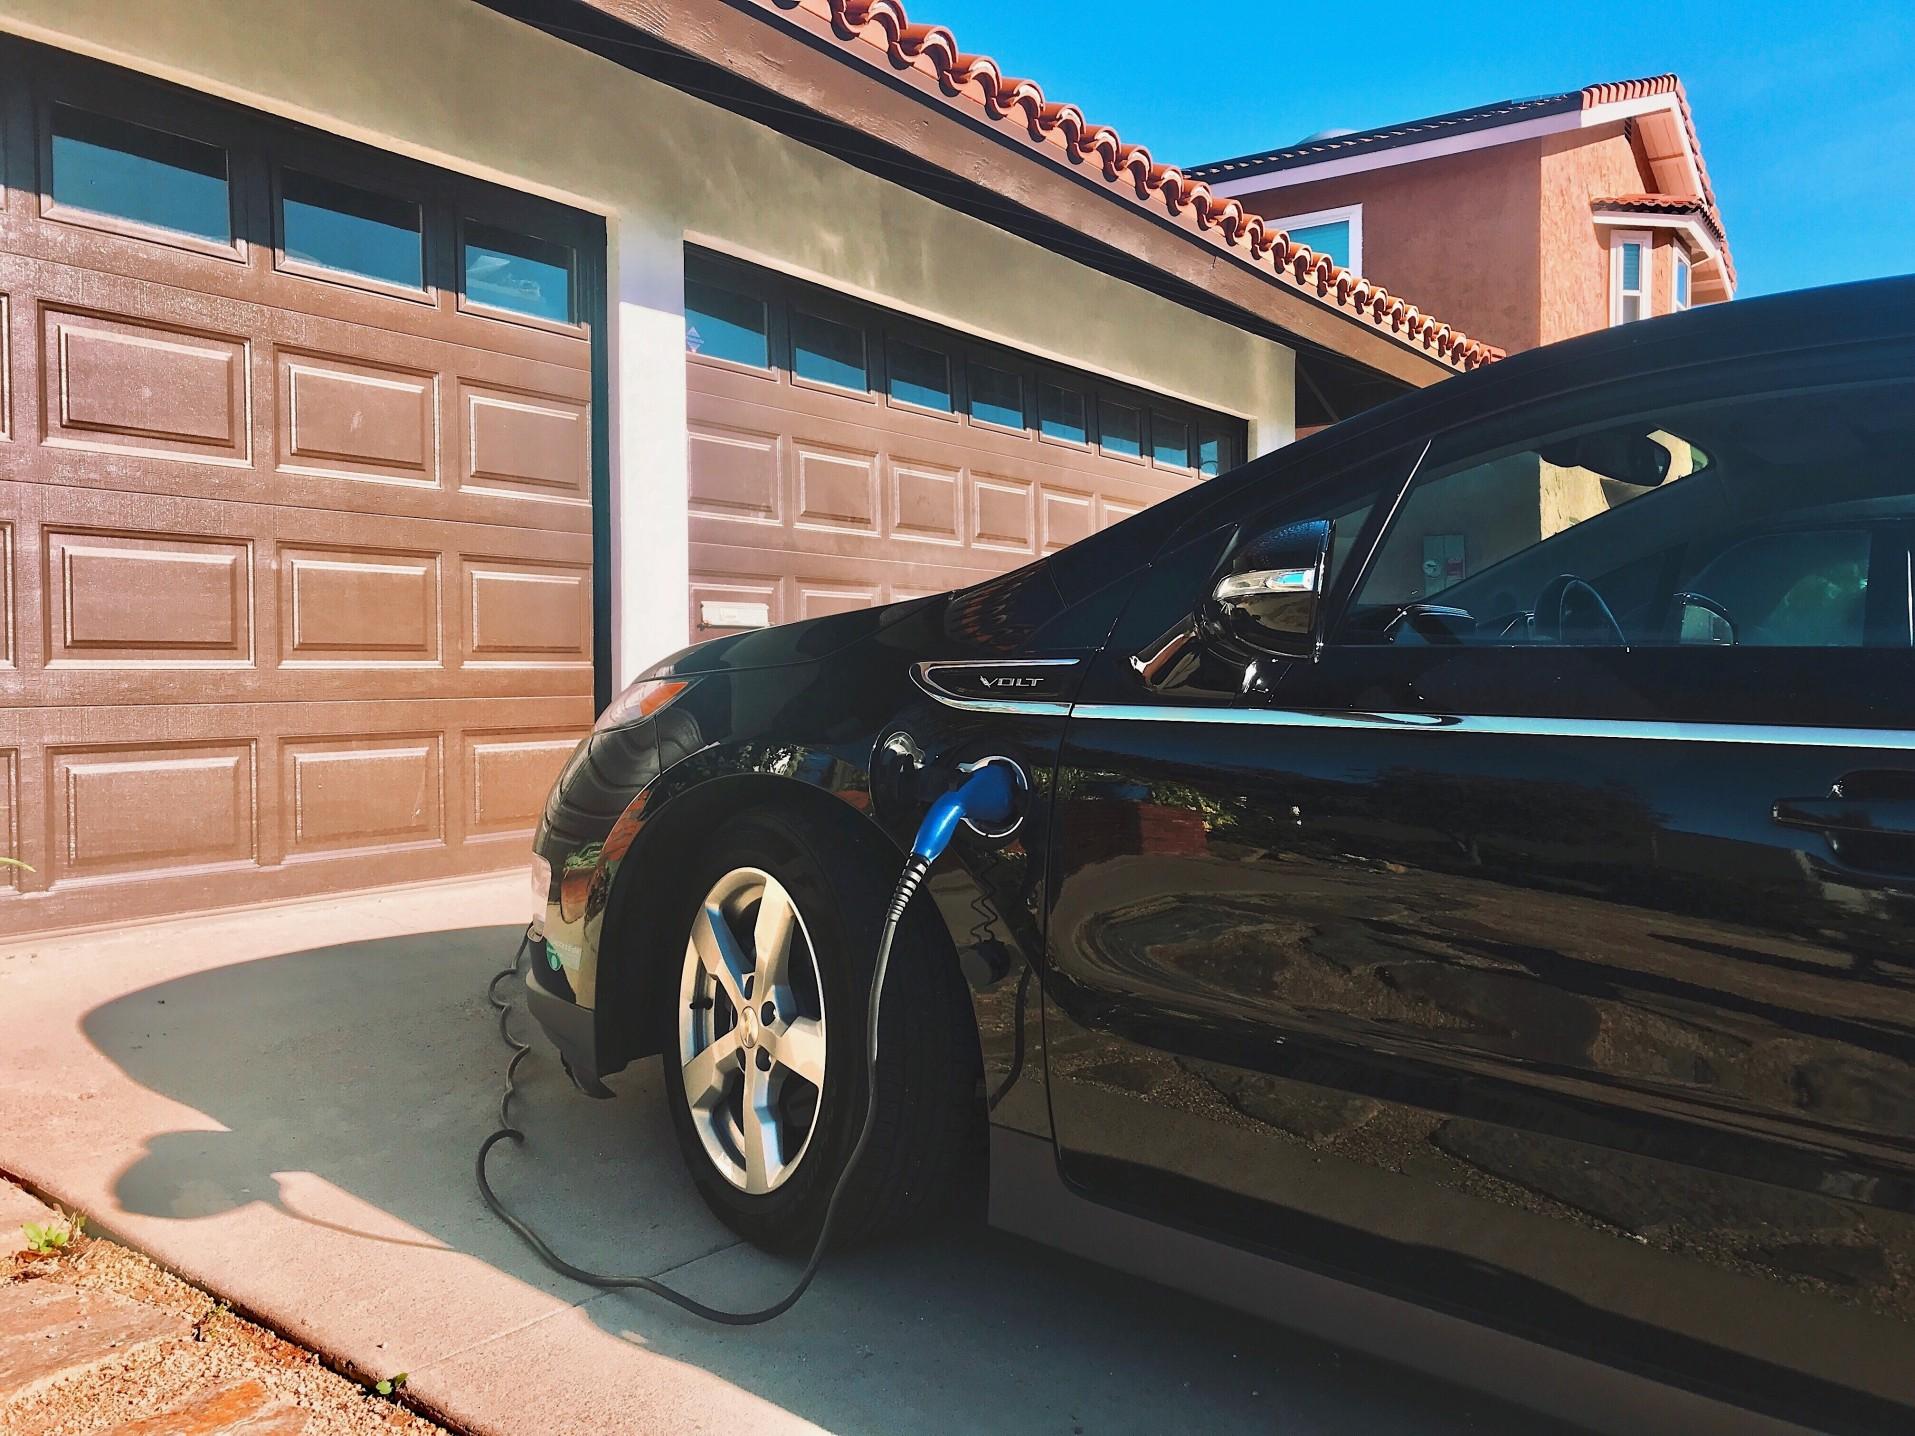 Charging your electric car at home could soon help power your house.